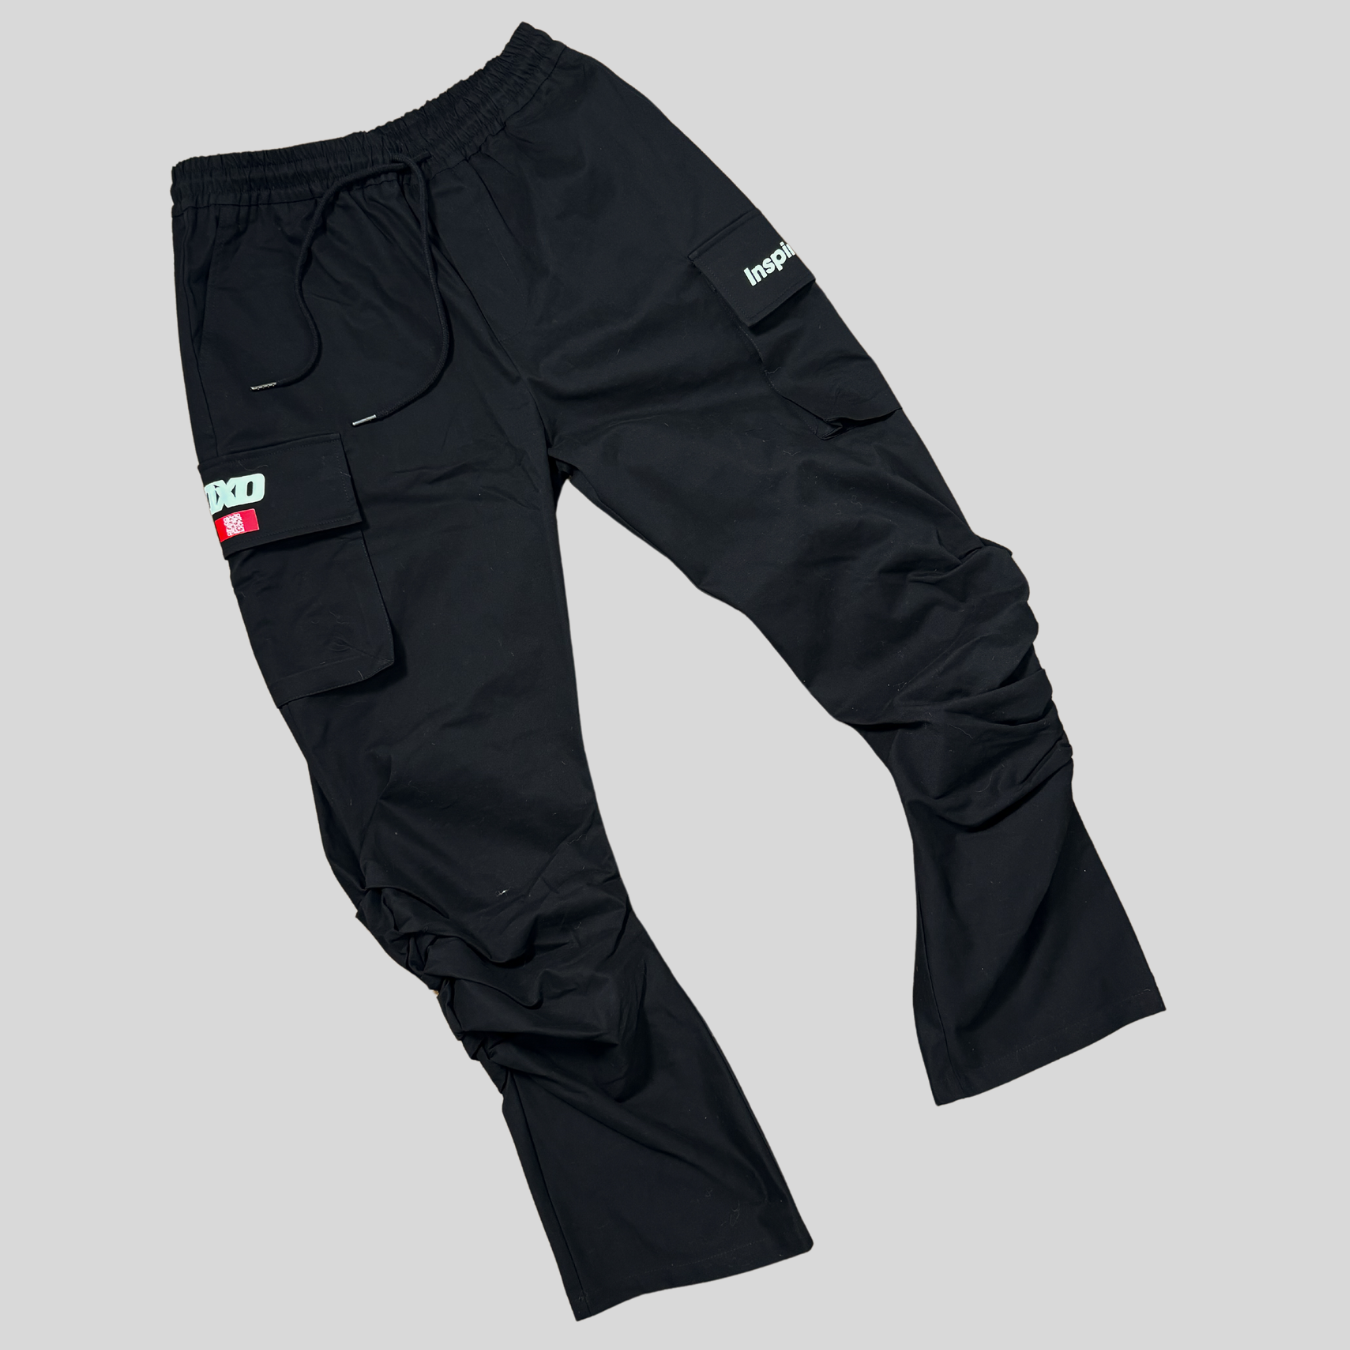 The Inspire Others Cargo Pants